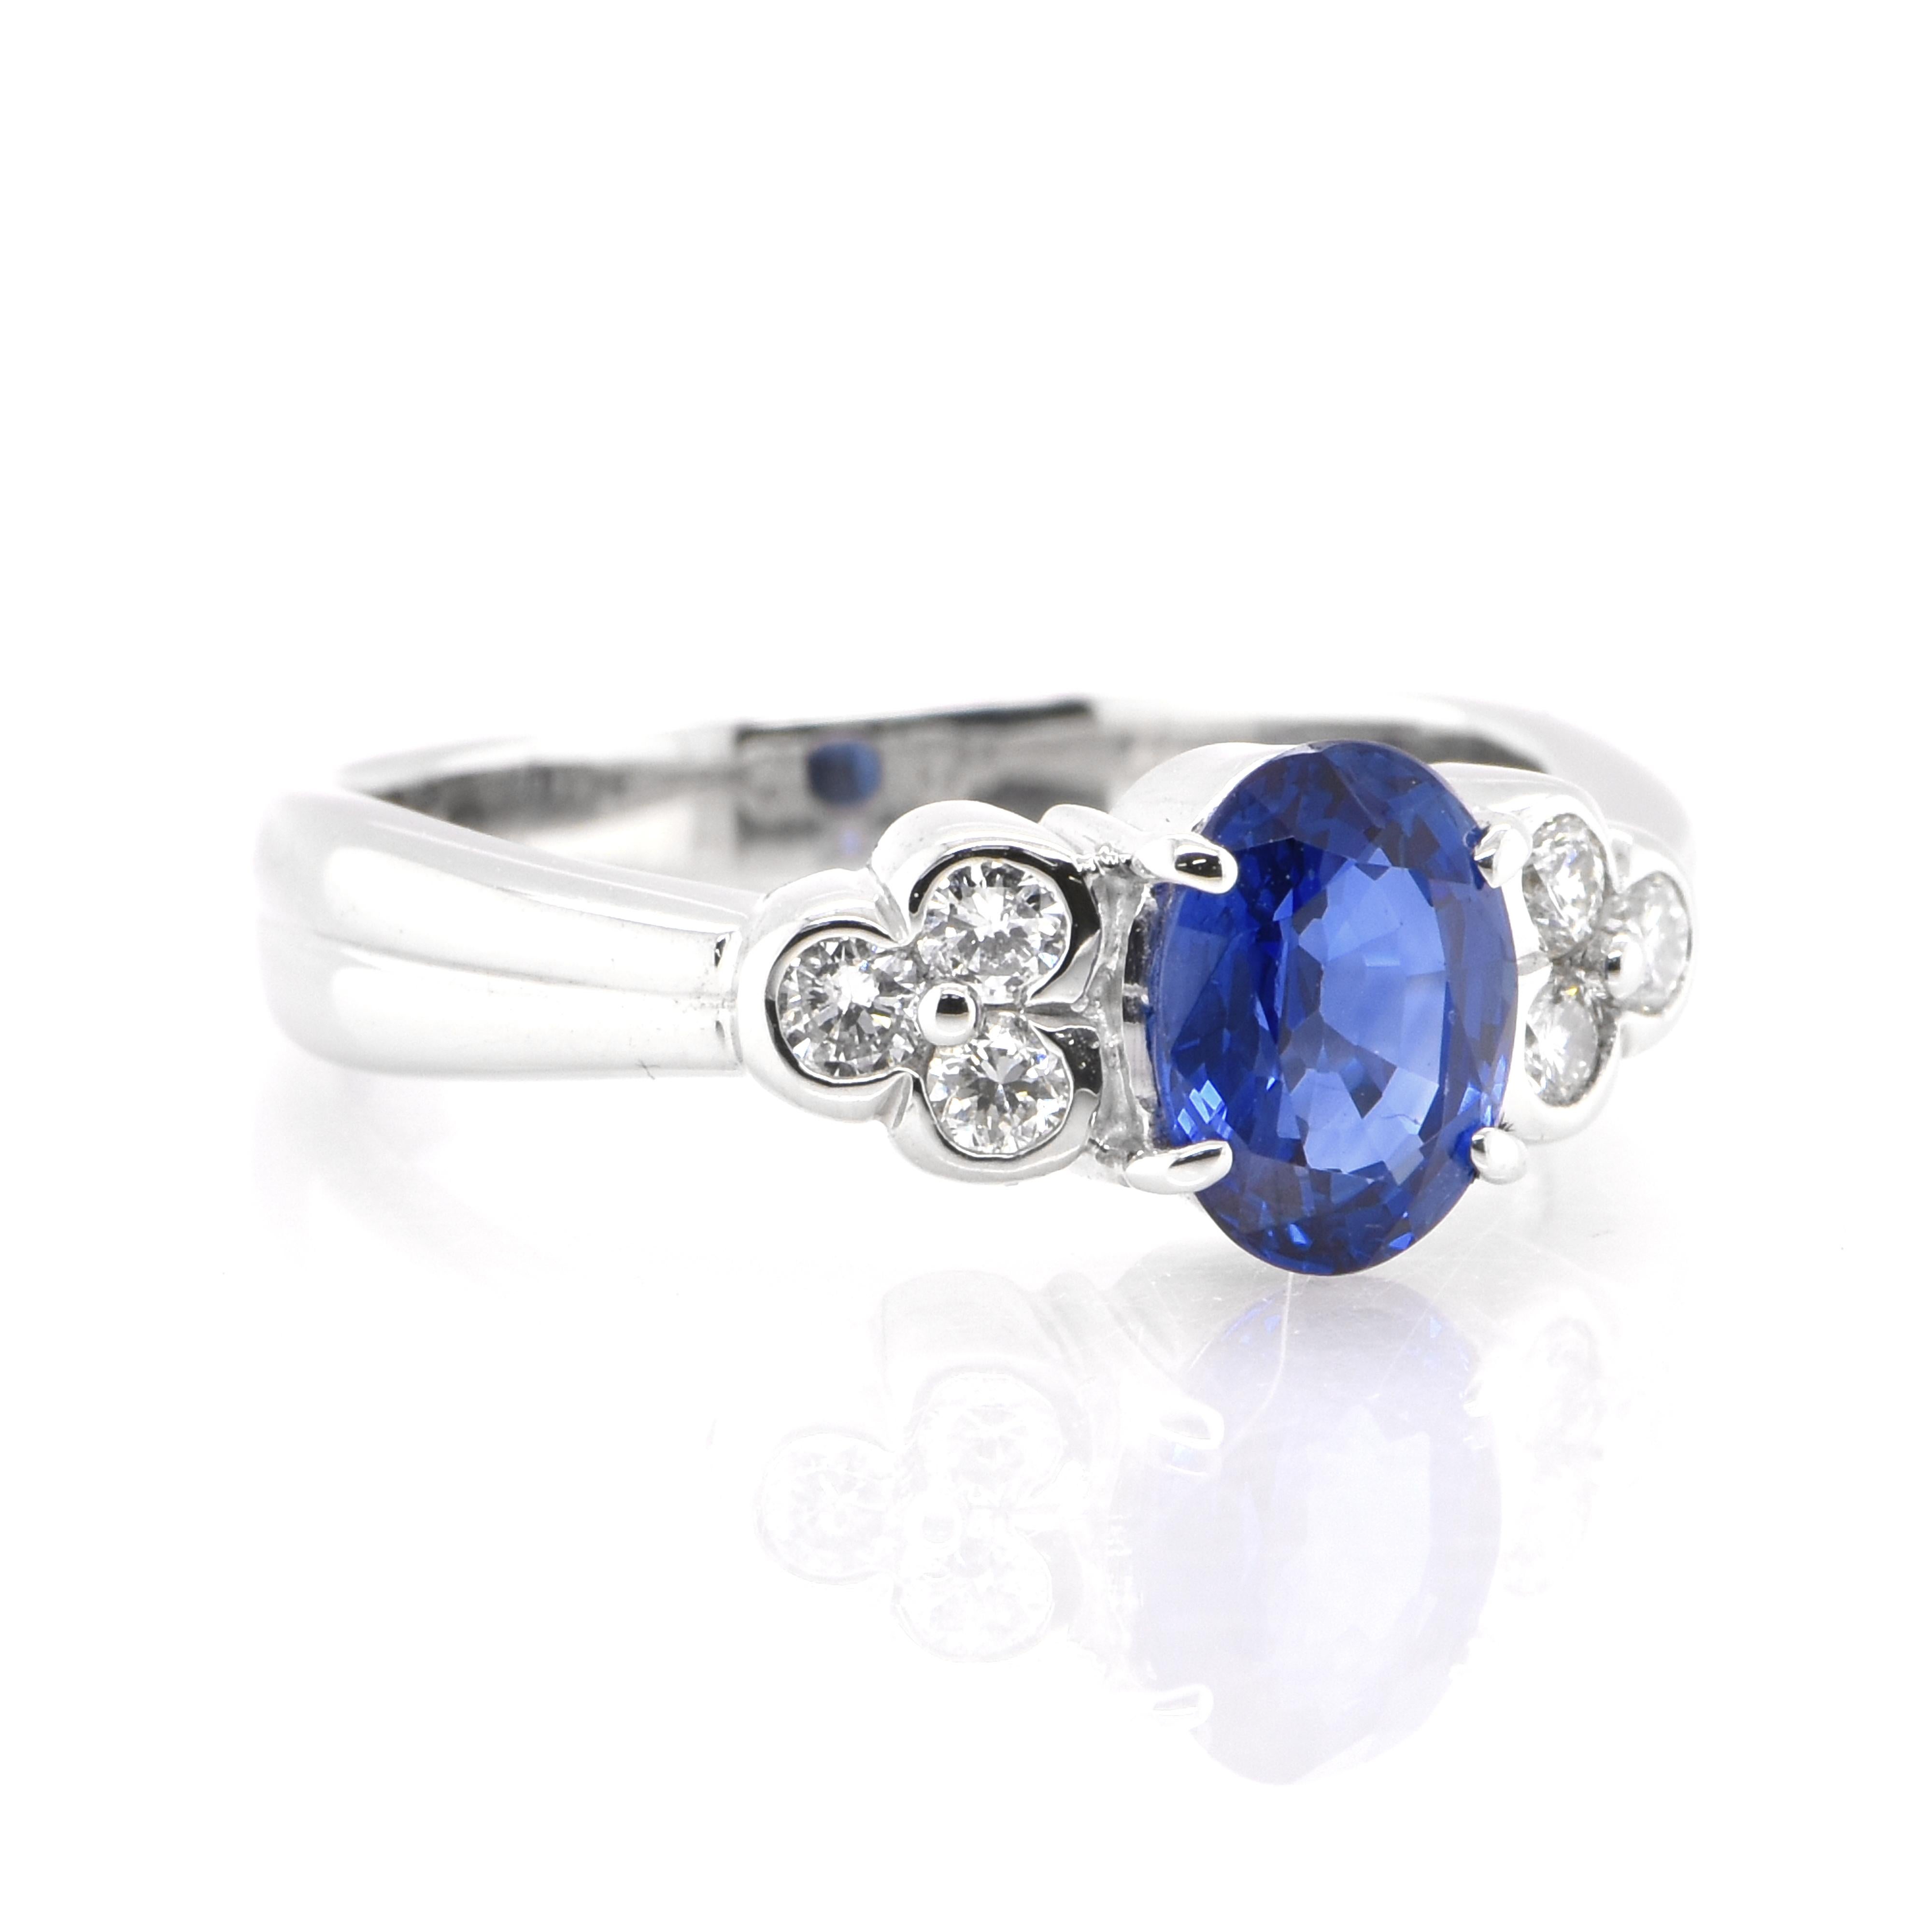 A beautiful ring featuring 1.27 Carat, Natural Sapphire and 0.21 carats Diamond Accents set in Platinum. Sapphires have extraordinary durability - they excel in hardness as well as toughness and durability making them very popular in jewelry.